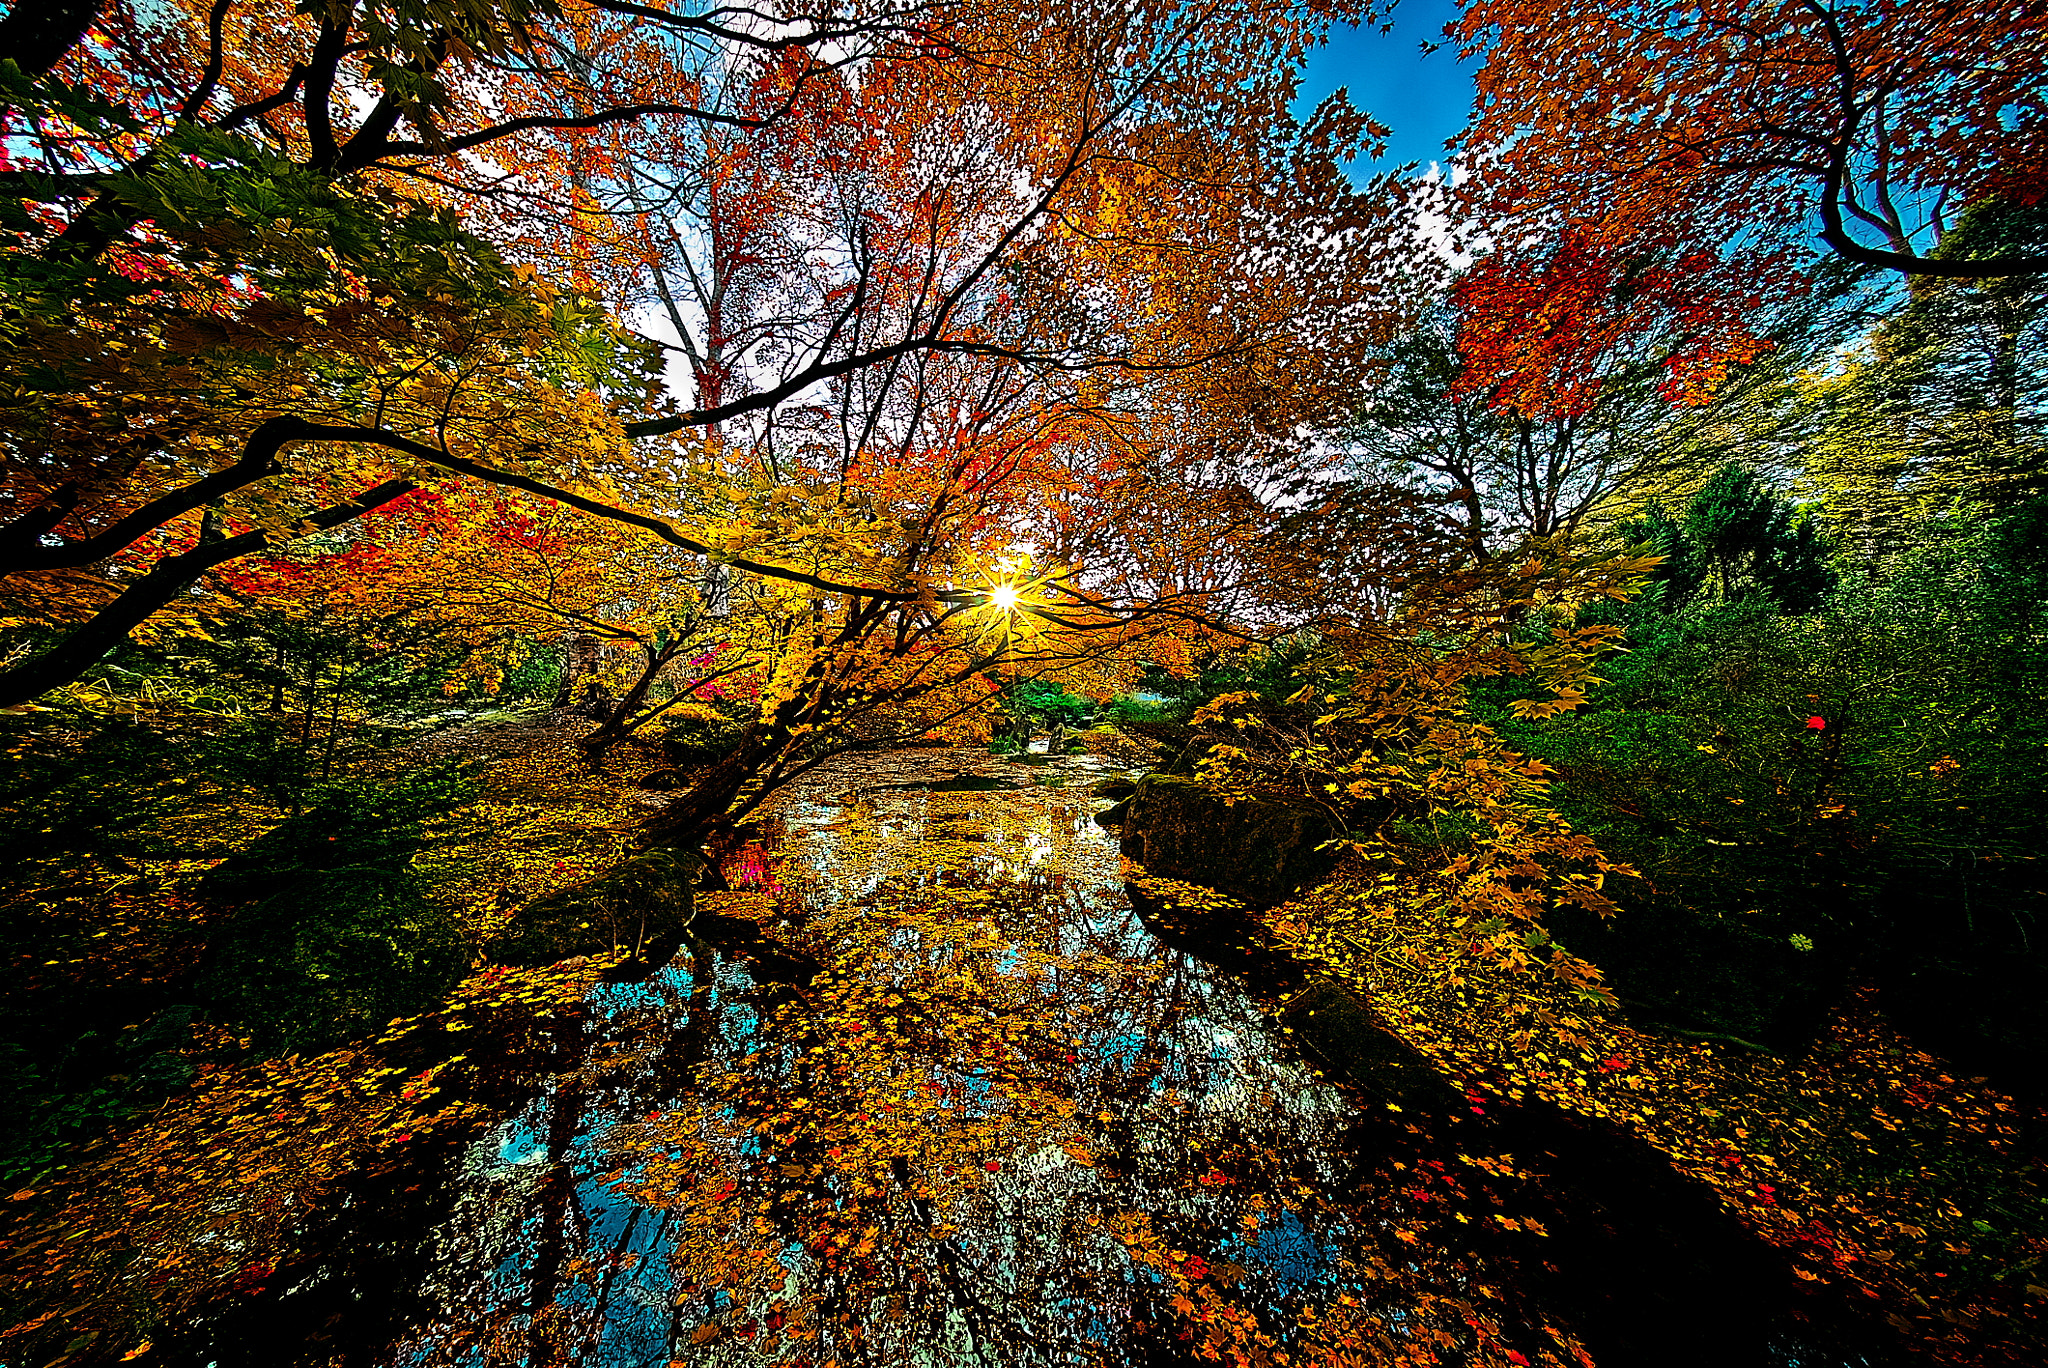 E 10mm F5.6 sample photo. Autumn colored waterside photography